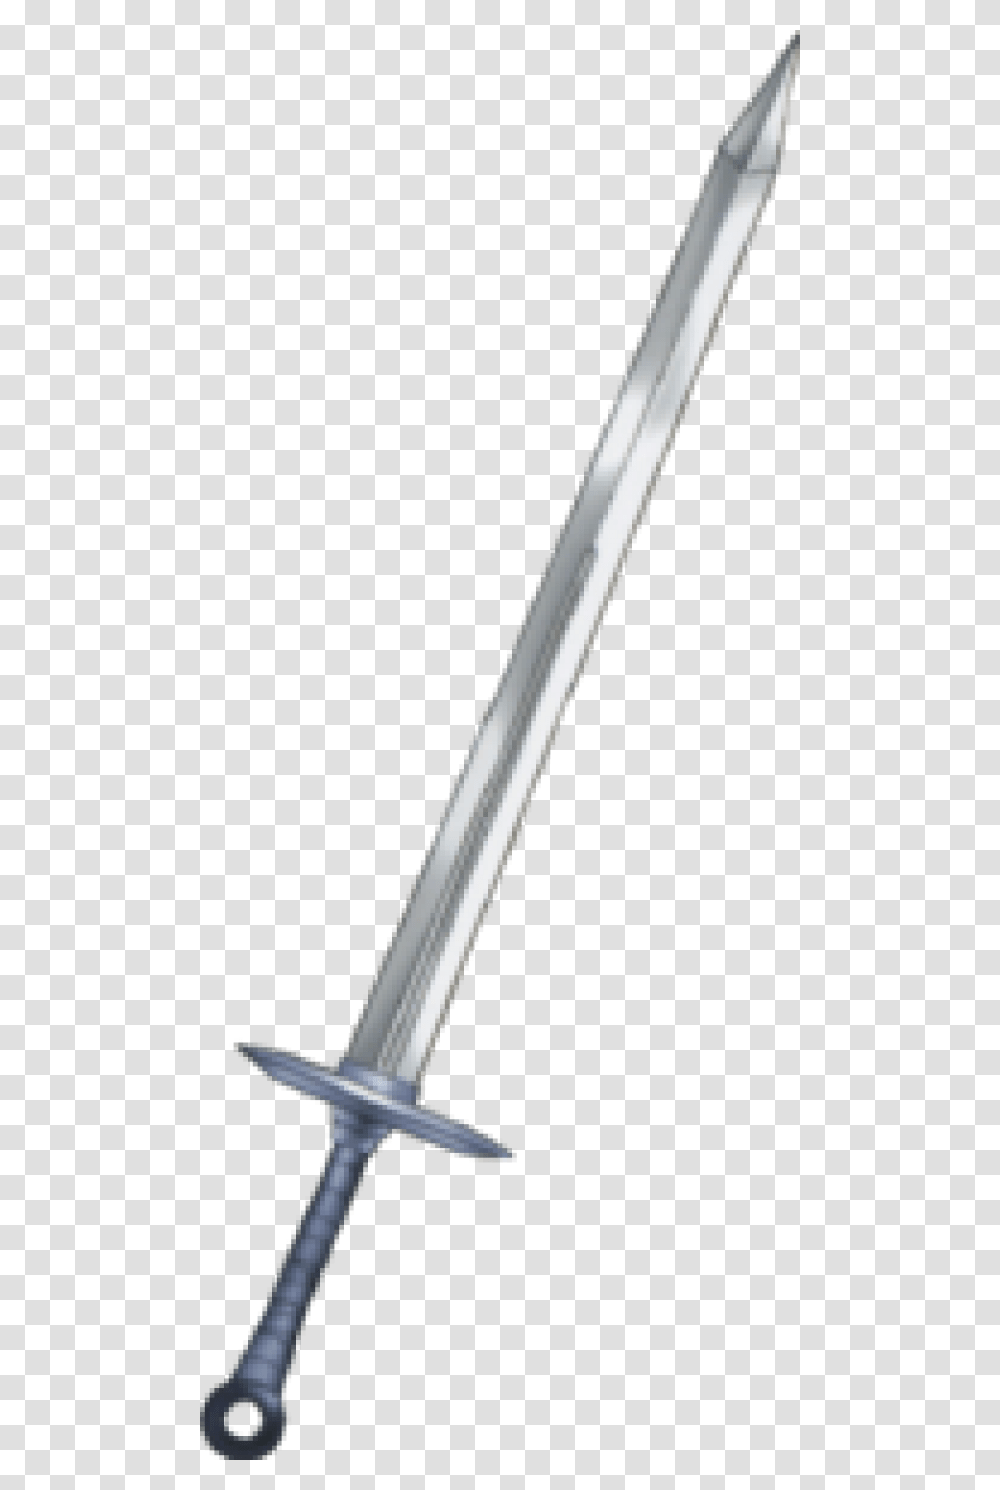 Sword Free Download Fire Sword, Blade, Weapon, Cutlery, Fork Transparent Png